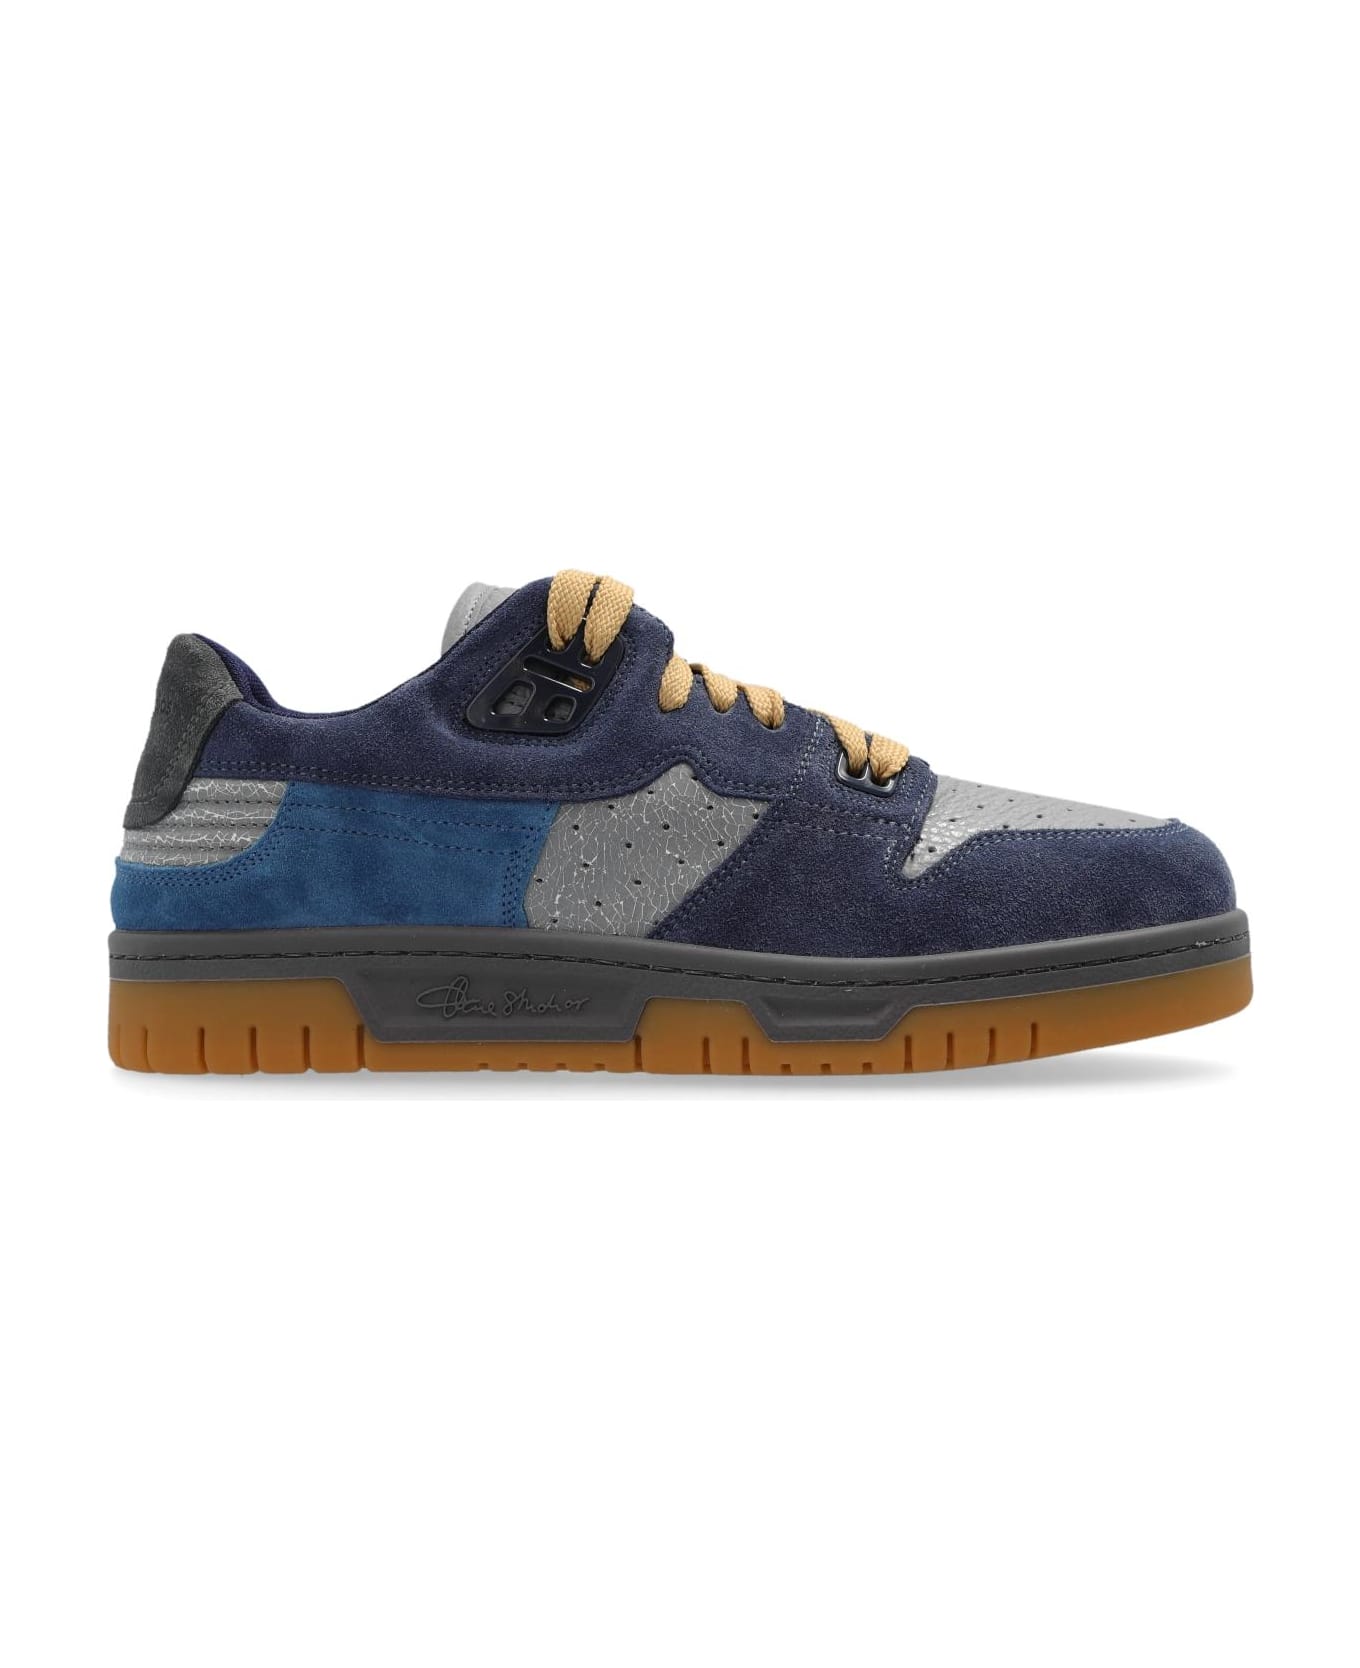 Acne Studios Leather Sneakers - Afs Grey/blue スニーカー